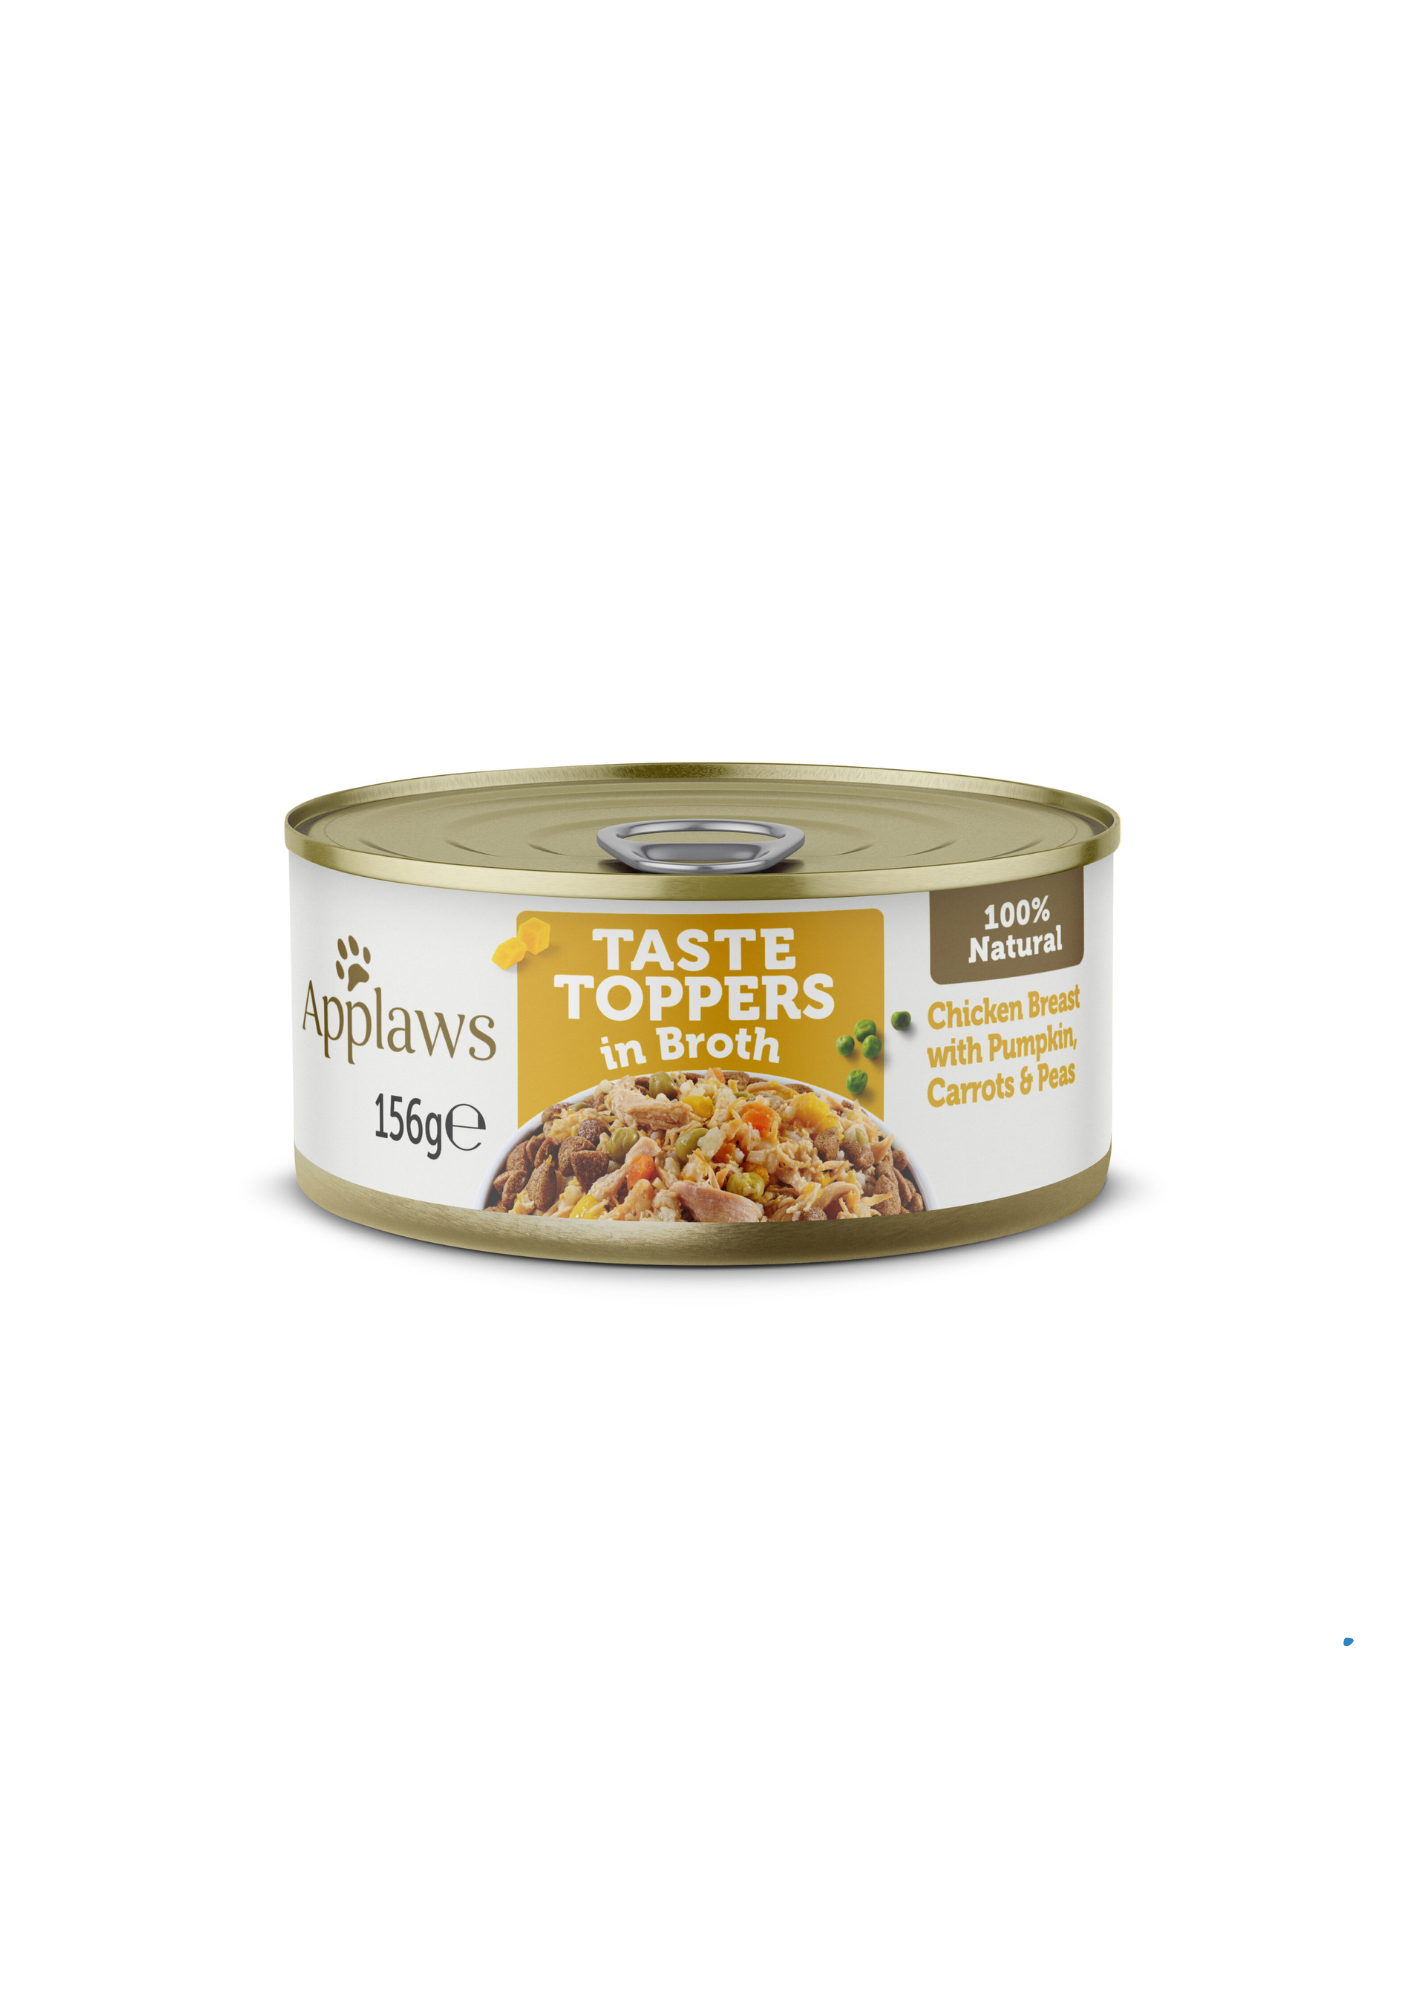 Applaws Taste Toppers in Broth Chicken Breast with Pumpkin, Carrots & Peas, 100% Natural Complements Dry Dog Food, 156 g